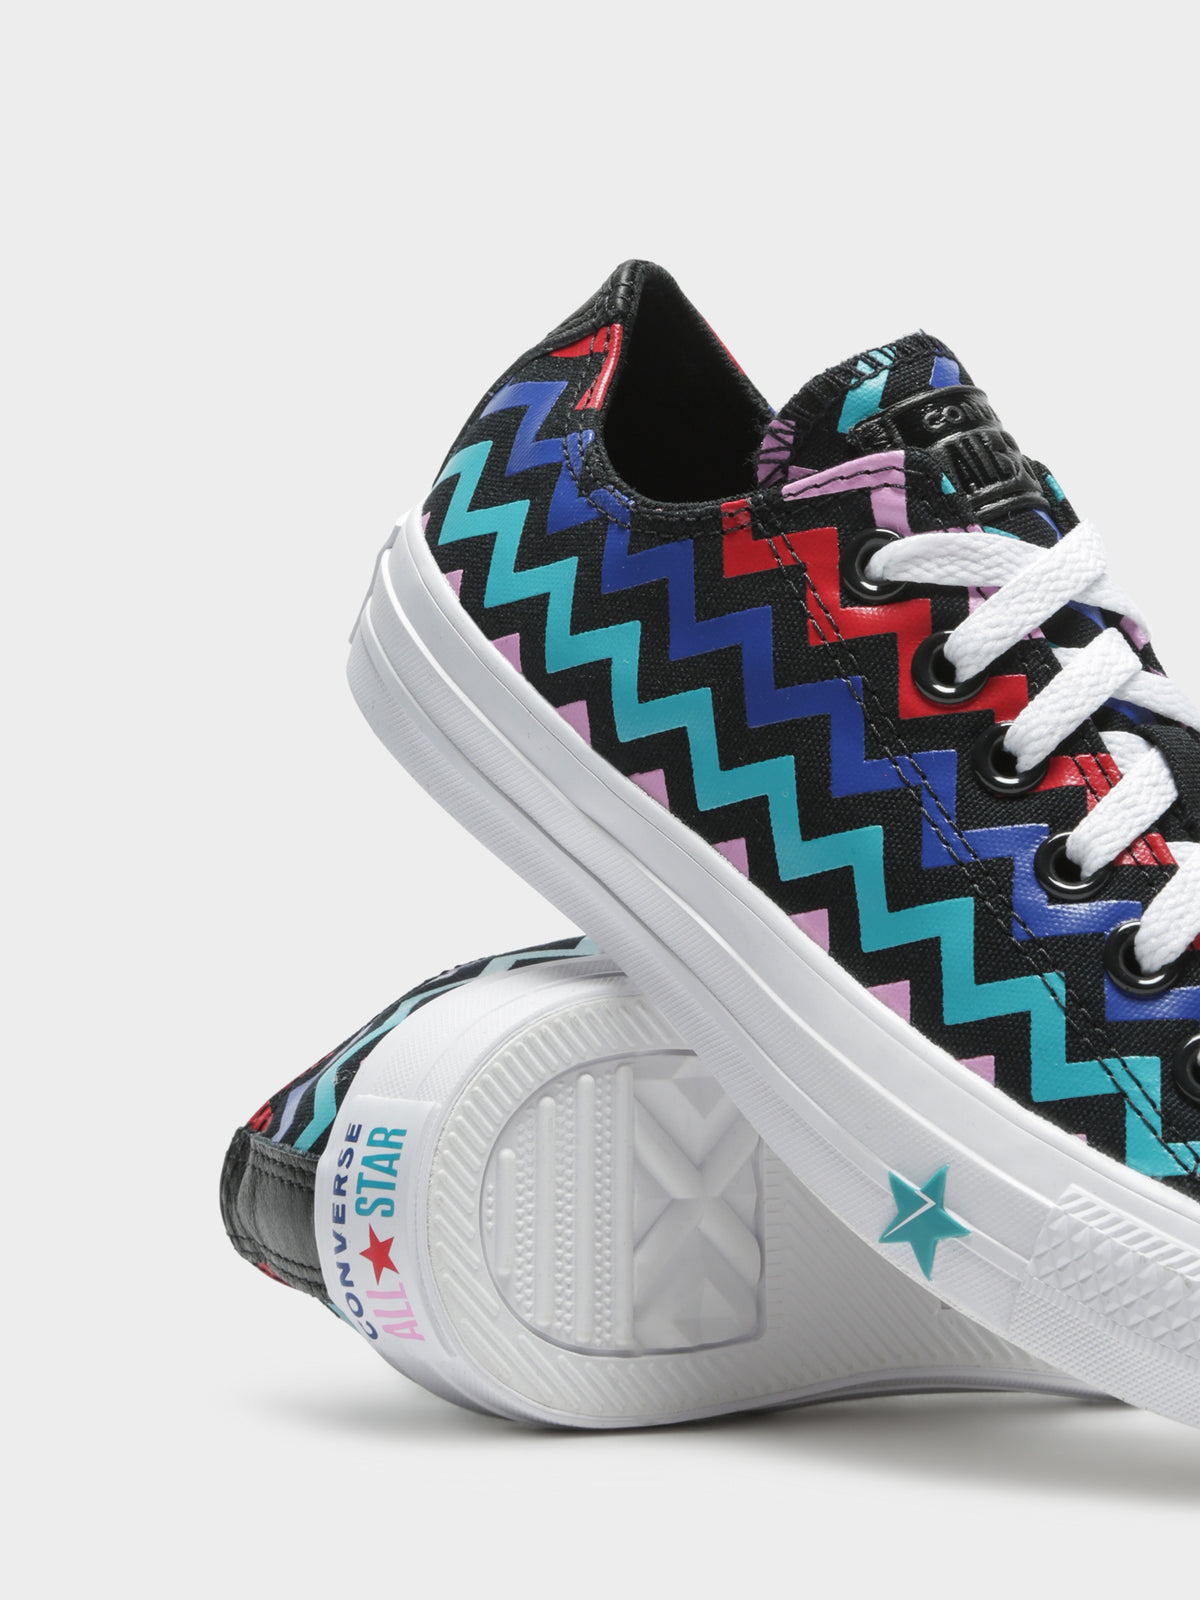 Chuck Taylor All Star VLTG Low Top Sneakers in Black Peony Pink &amp; Teal